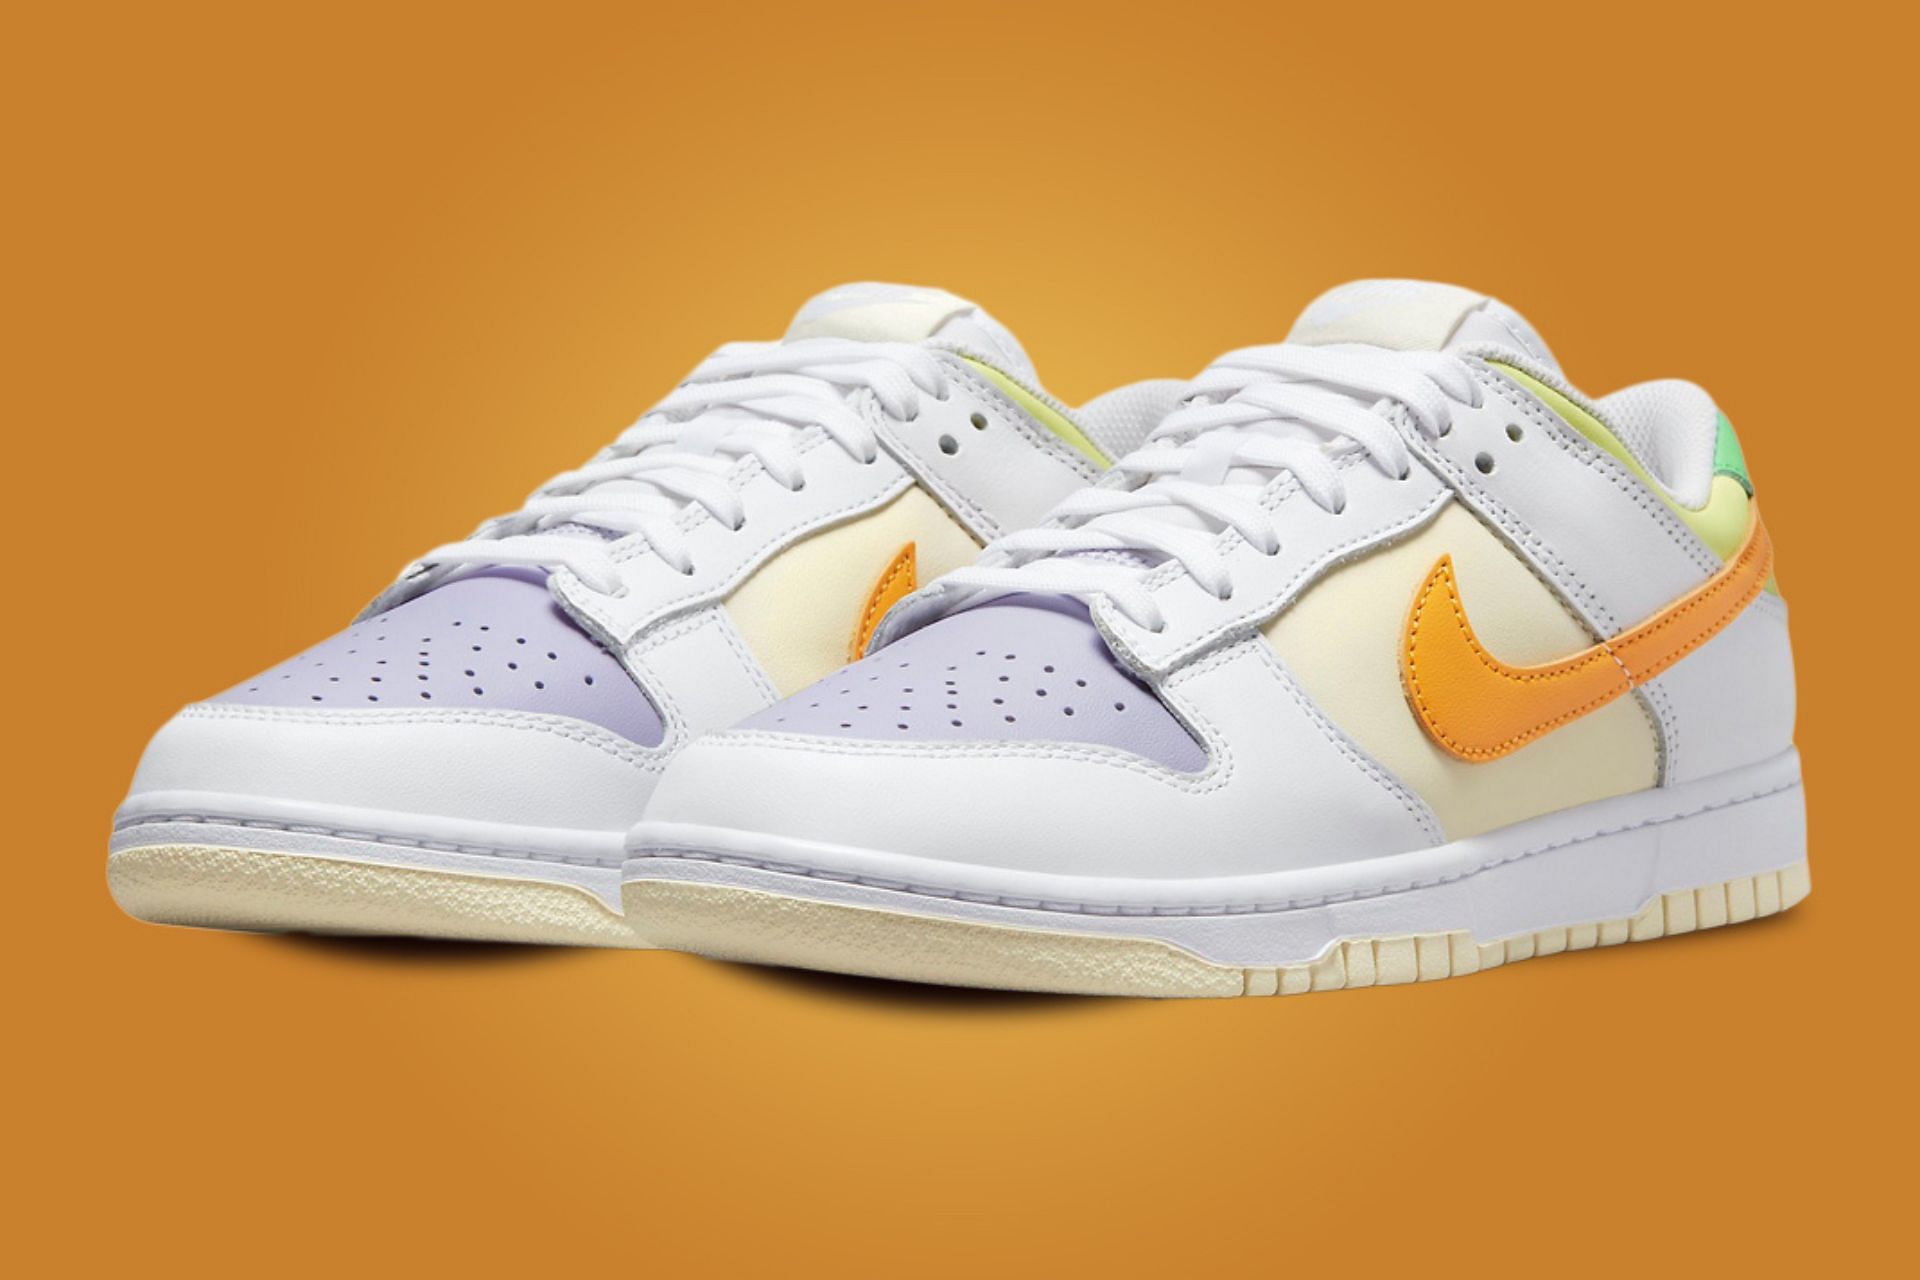 Nike Dunk Low “White Sundial” shoes Where to buy, price, and more